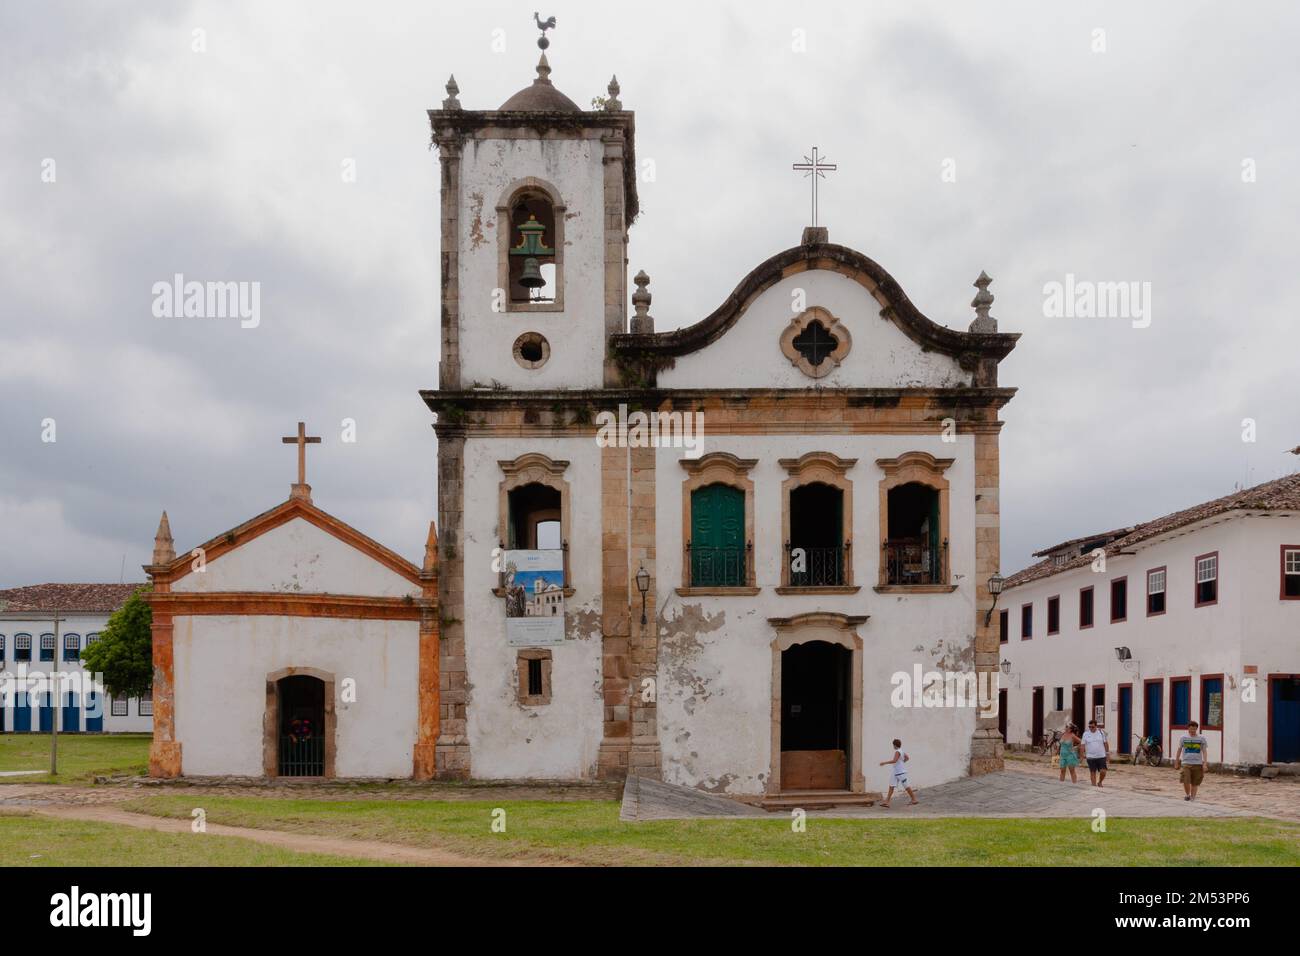 Paraty, Brazil. 27 December, 2012. A general view shows Capela de Santa Rita (Chapel of Saint Rita) during cloudy day, in Paraty (or Parati), Rio de Janeiro, Brazil. The historic center of Paraty, were inscribed on UNESCO World Heritage List in 2019 under the title 'Paraty and Ilha Grande'. Stock Photo